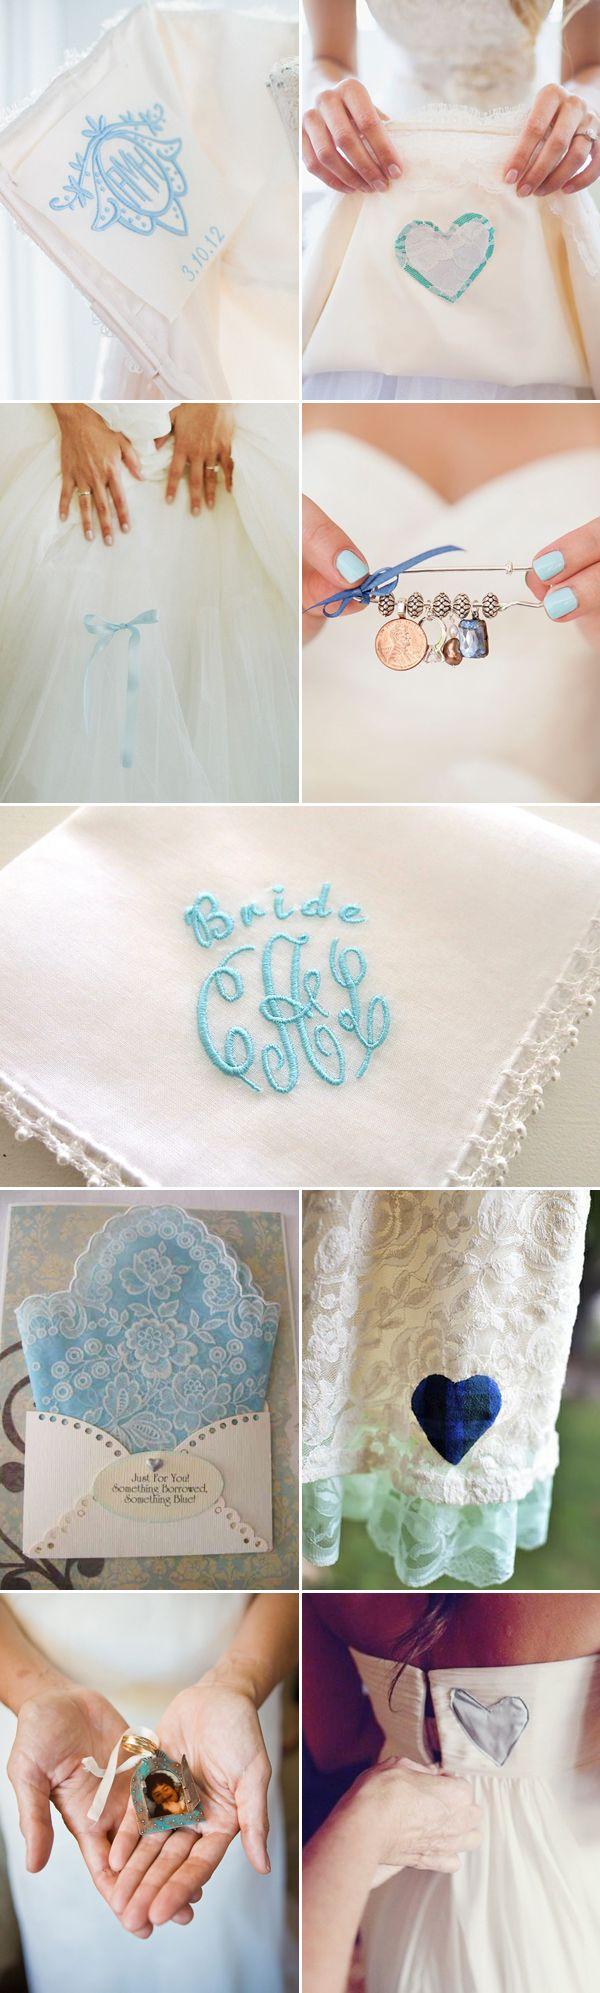 Hochzeit - 55 Creative Ideas For Your "Something Blue"